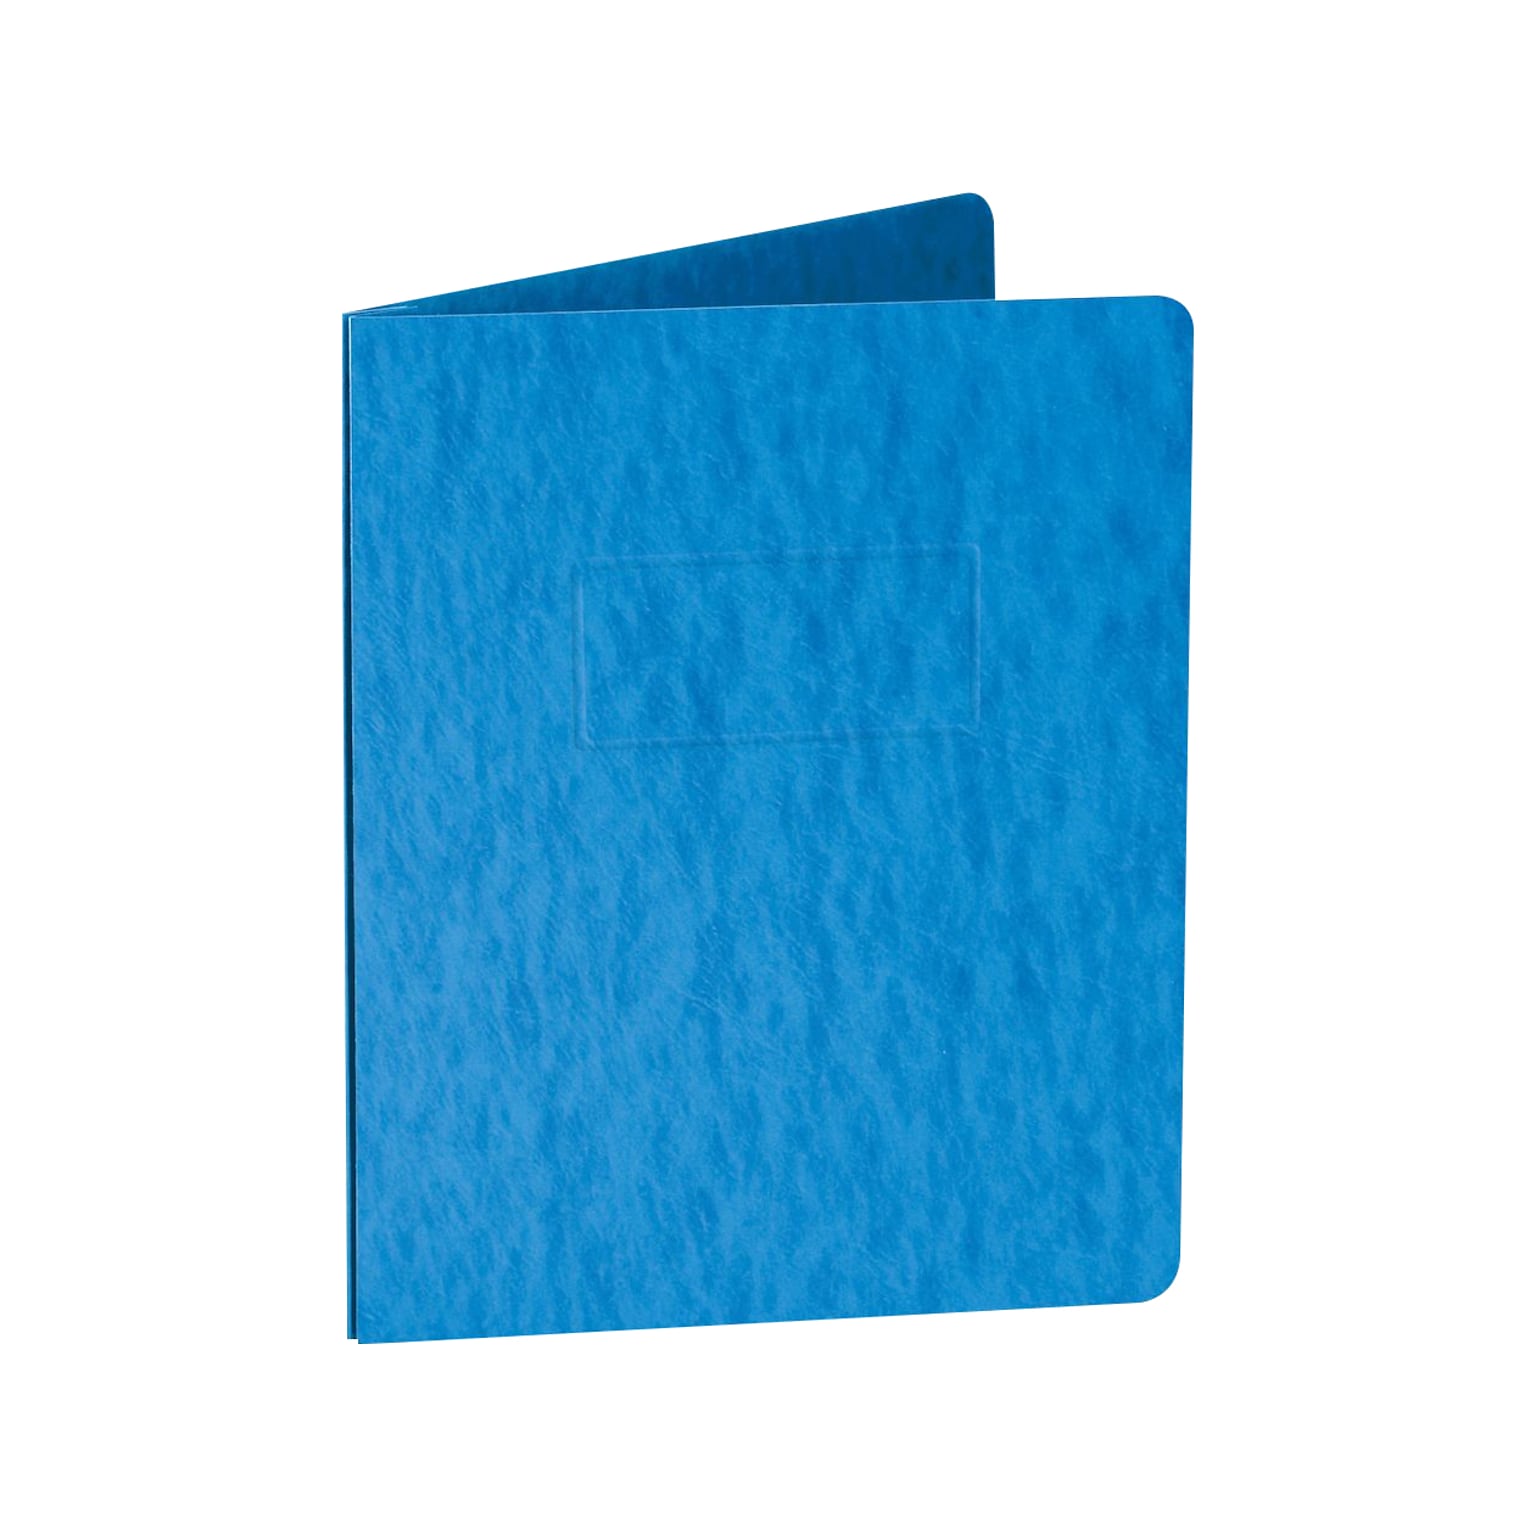 Oxford 2-Prong Report Covers, Letter Size, Blue, 5/Pack (OXF 99401EE)